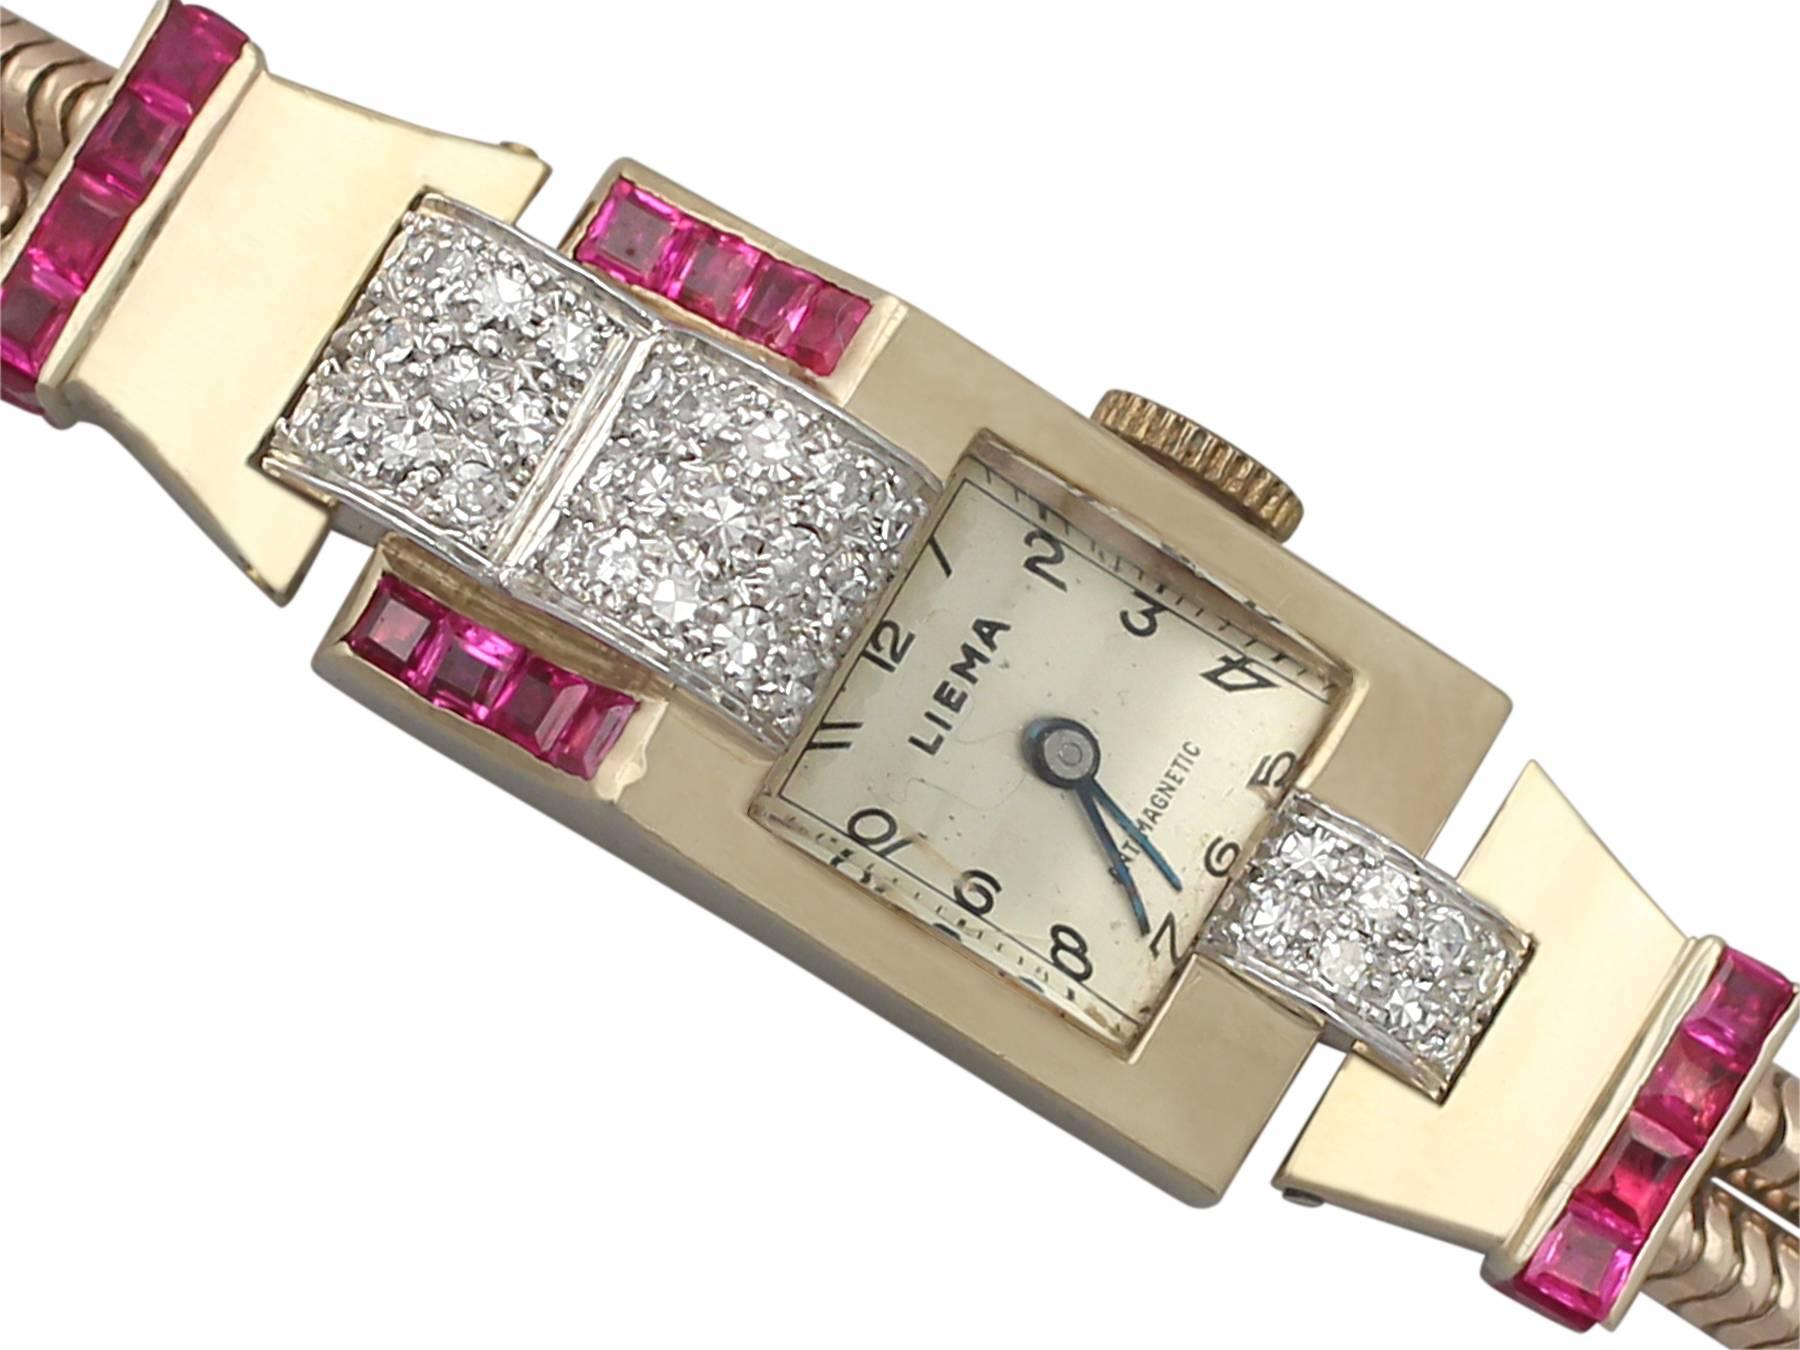 A stunning, fine and impressive vintage 1.11 carat diamond and 0.55 carat natural ruby, 9 carat yellow gold ladies cocktail watch in the Art Deco style; part of our range of antique and vintage wrist watches

This stunning vintage ladies dress